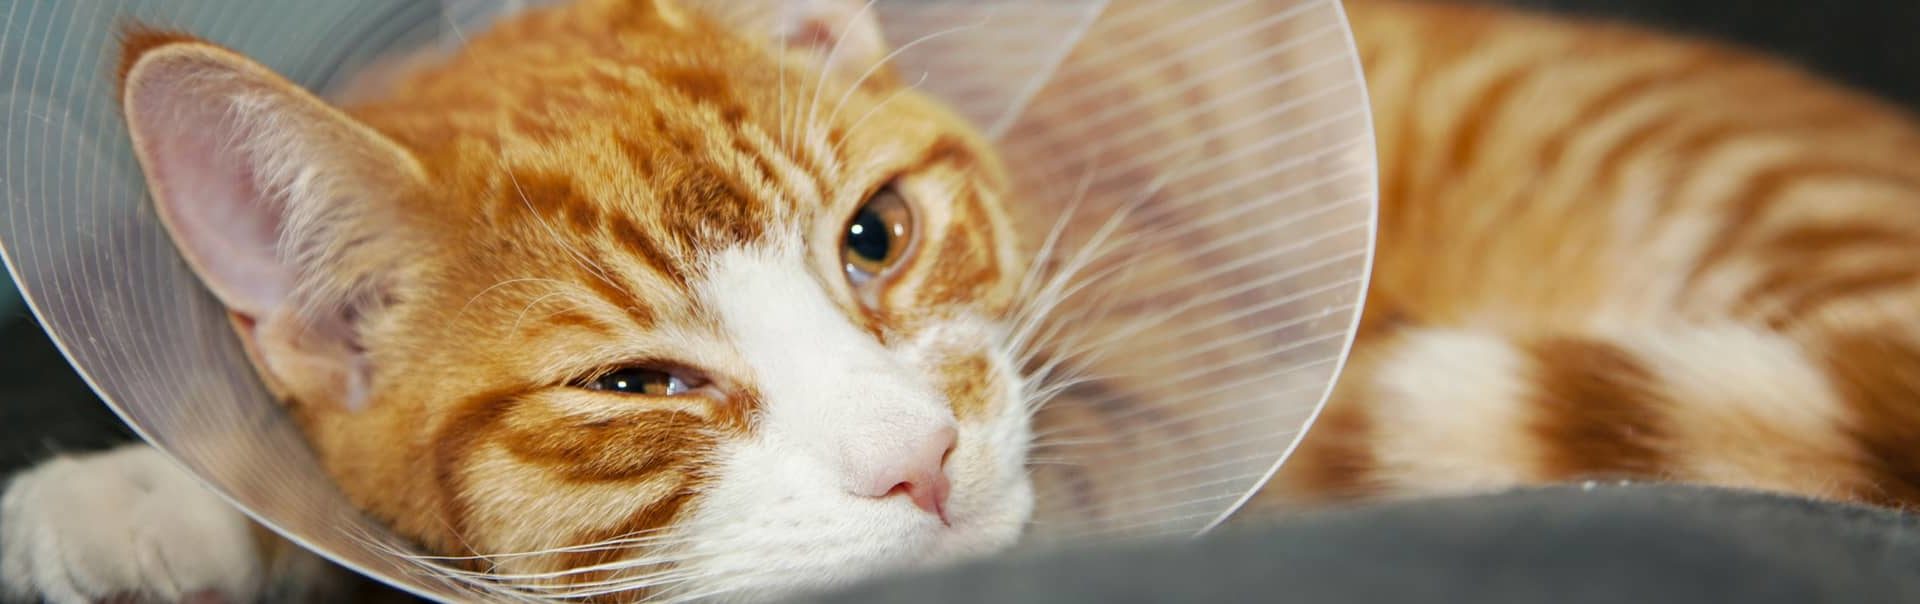 Ginger striped cat wearing a cone